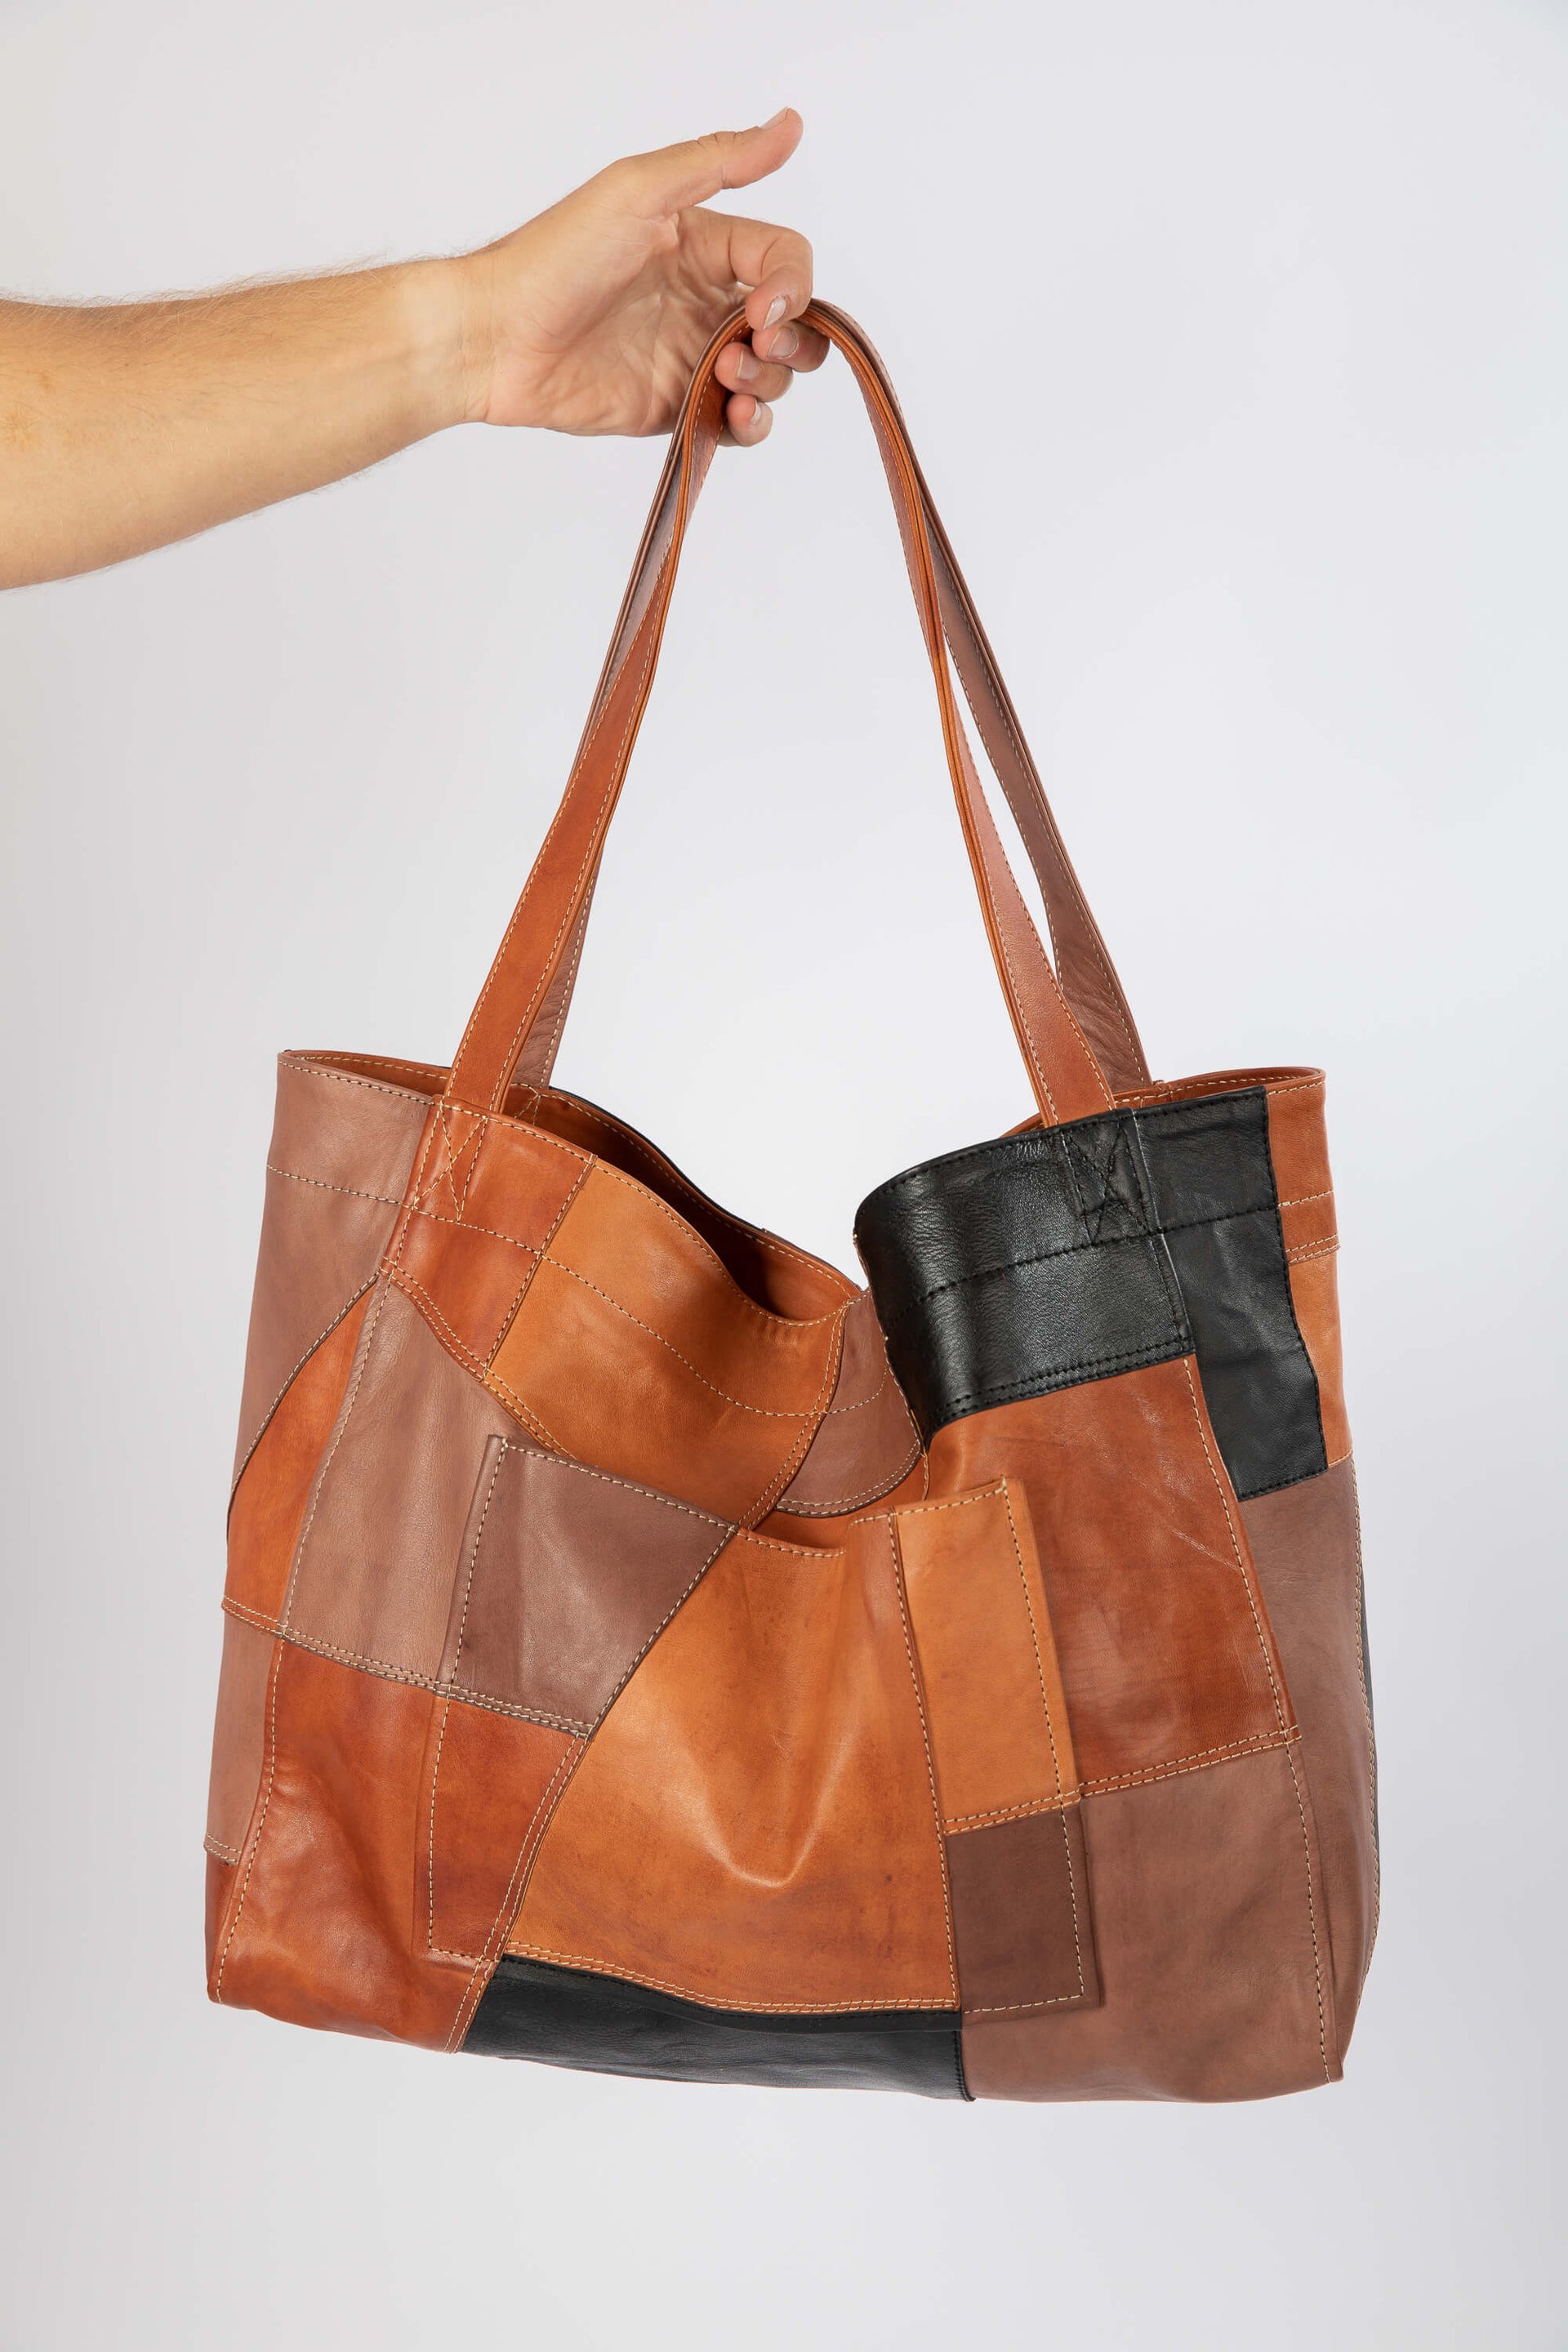 Up-cycled Patchwork Soft Leather Maxi Tote